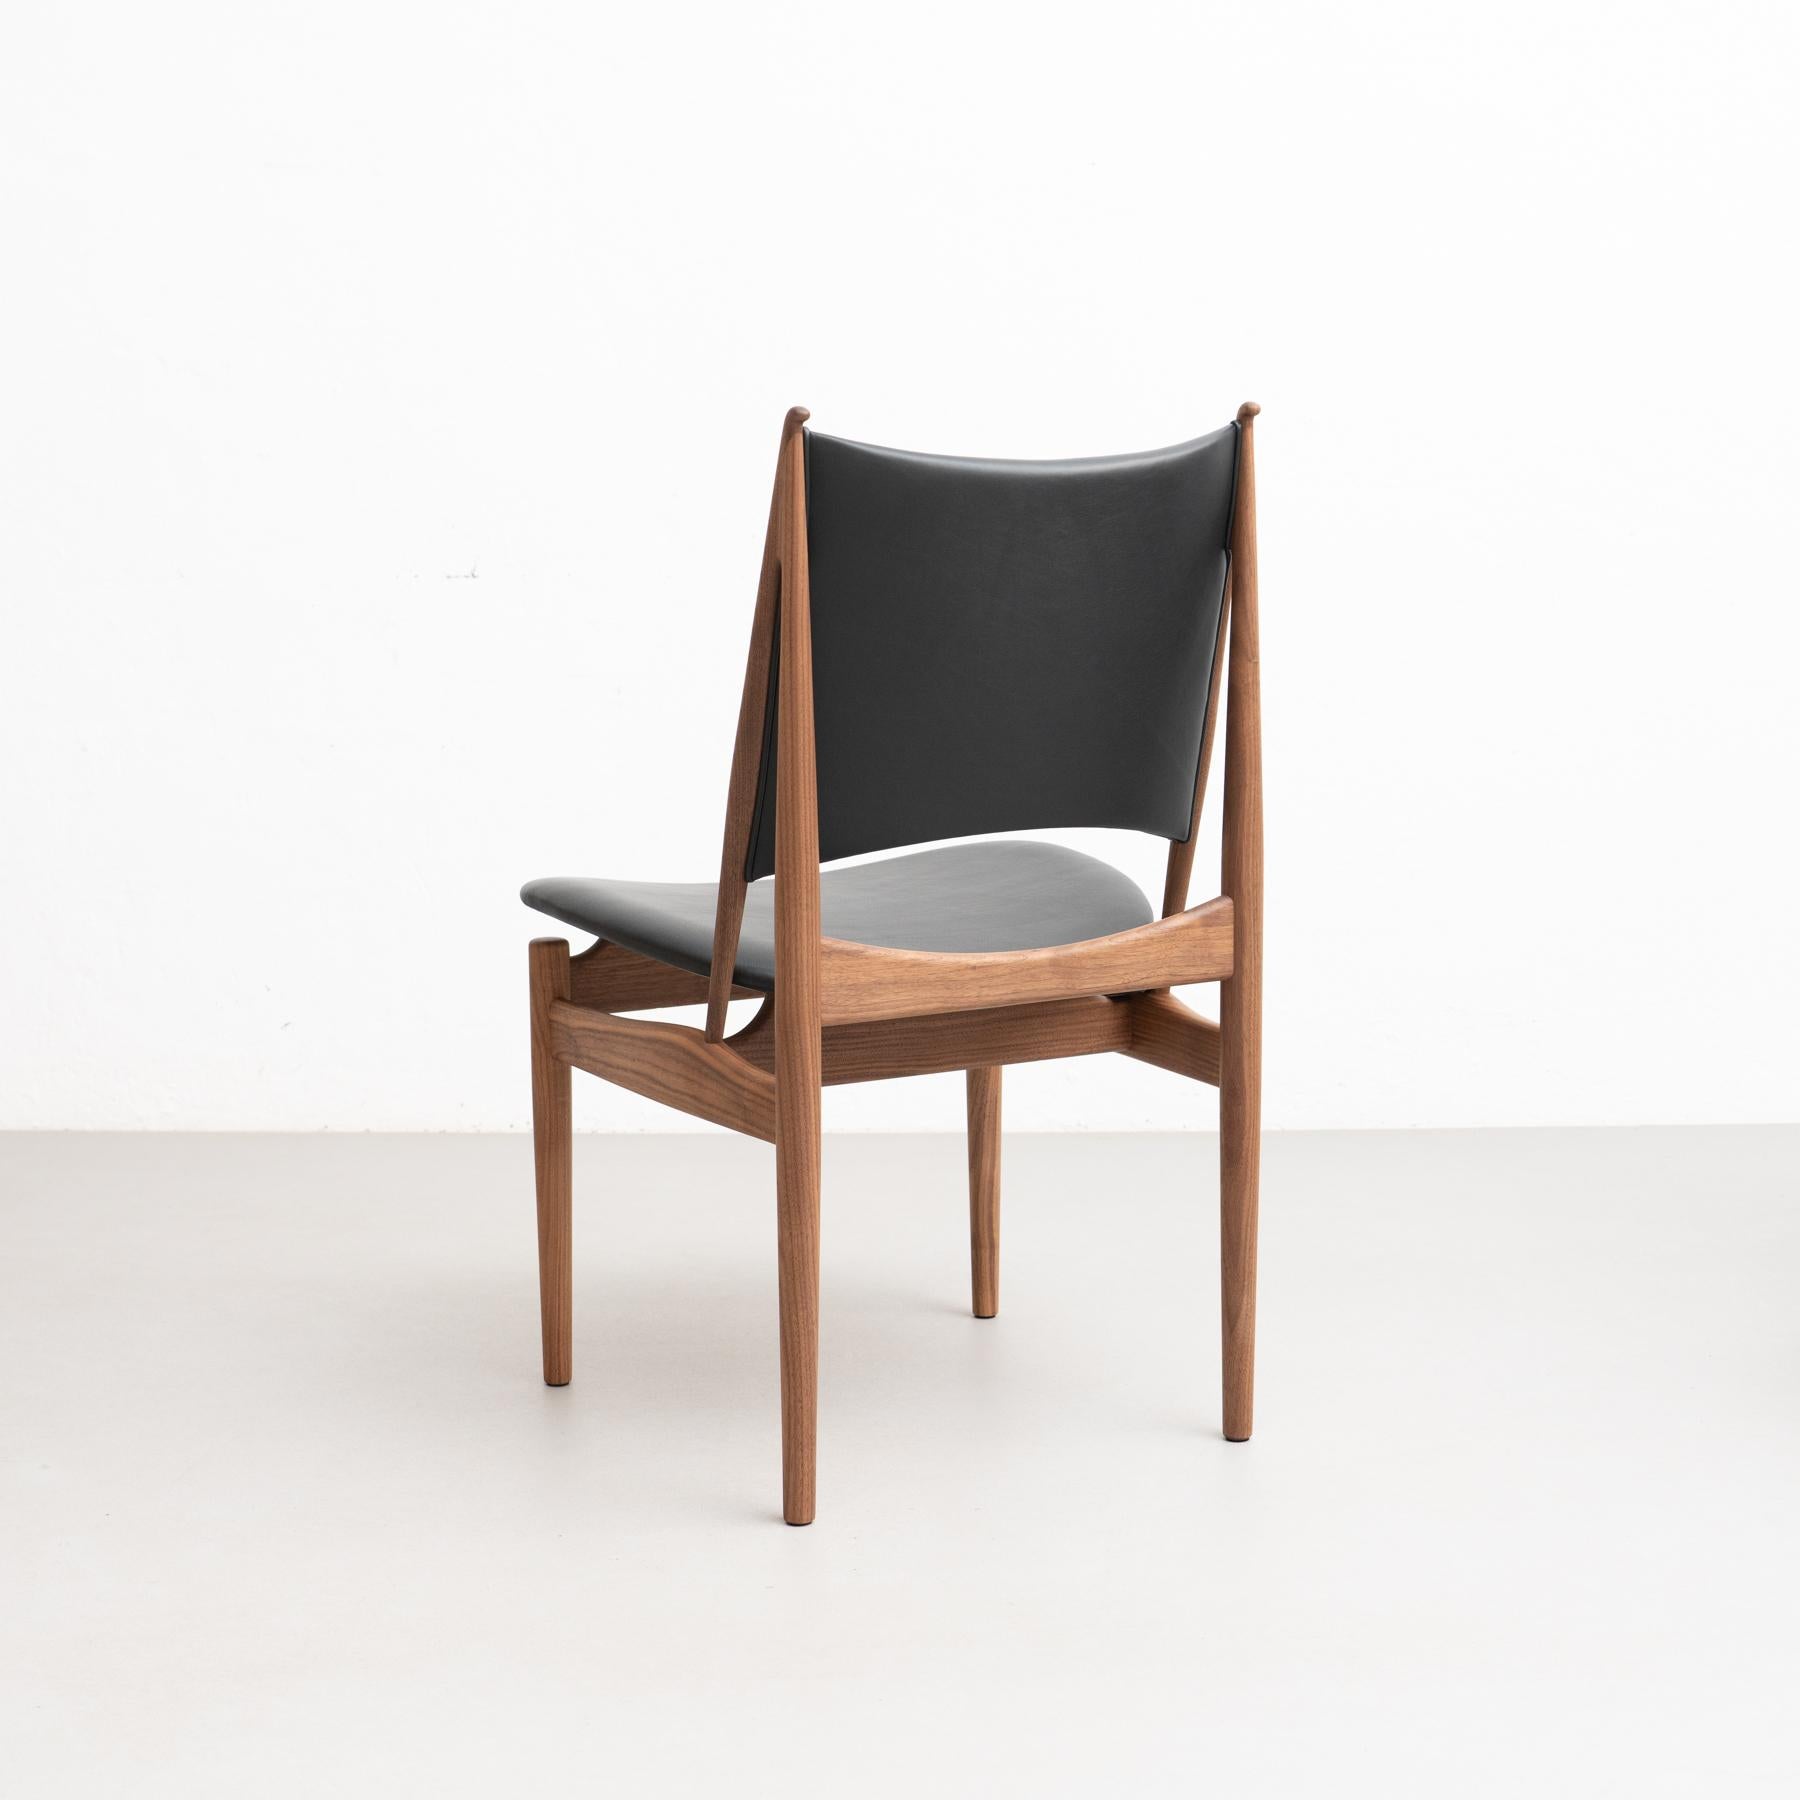 Egyptian Armchair in Wood and Leather, by Finn Juhl 3